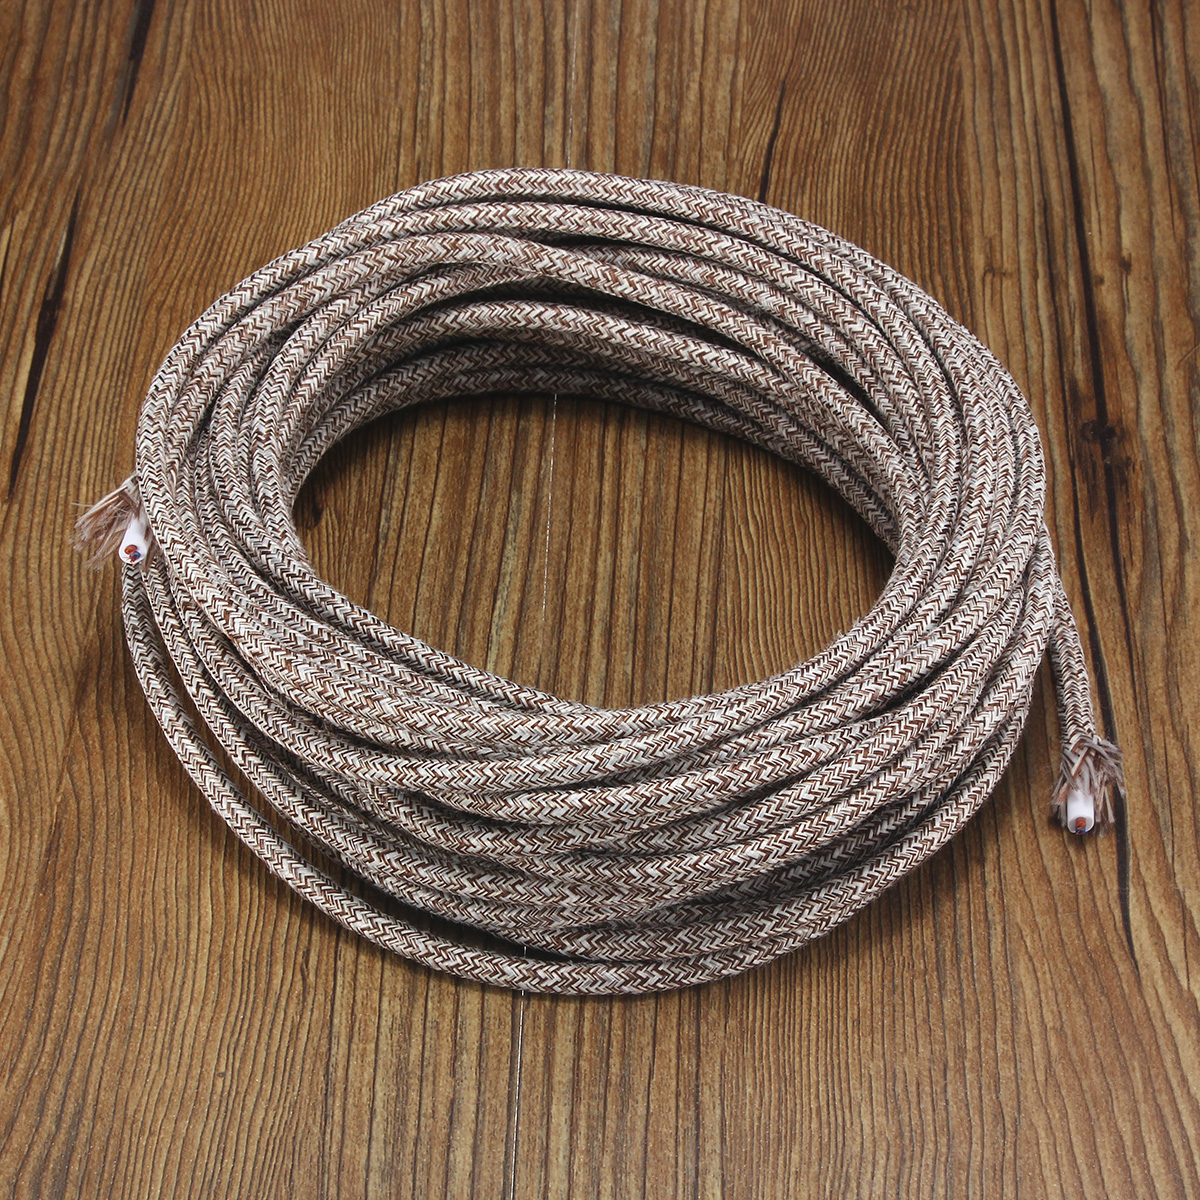 10M-2-Cord-Color-Vintage-Twist-Braided-Fabric-Light-Cable-Electric-Wire-1069140-9